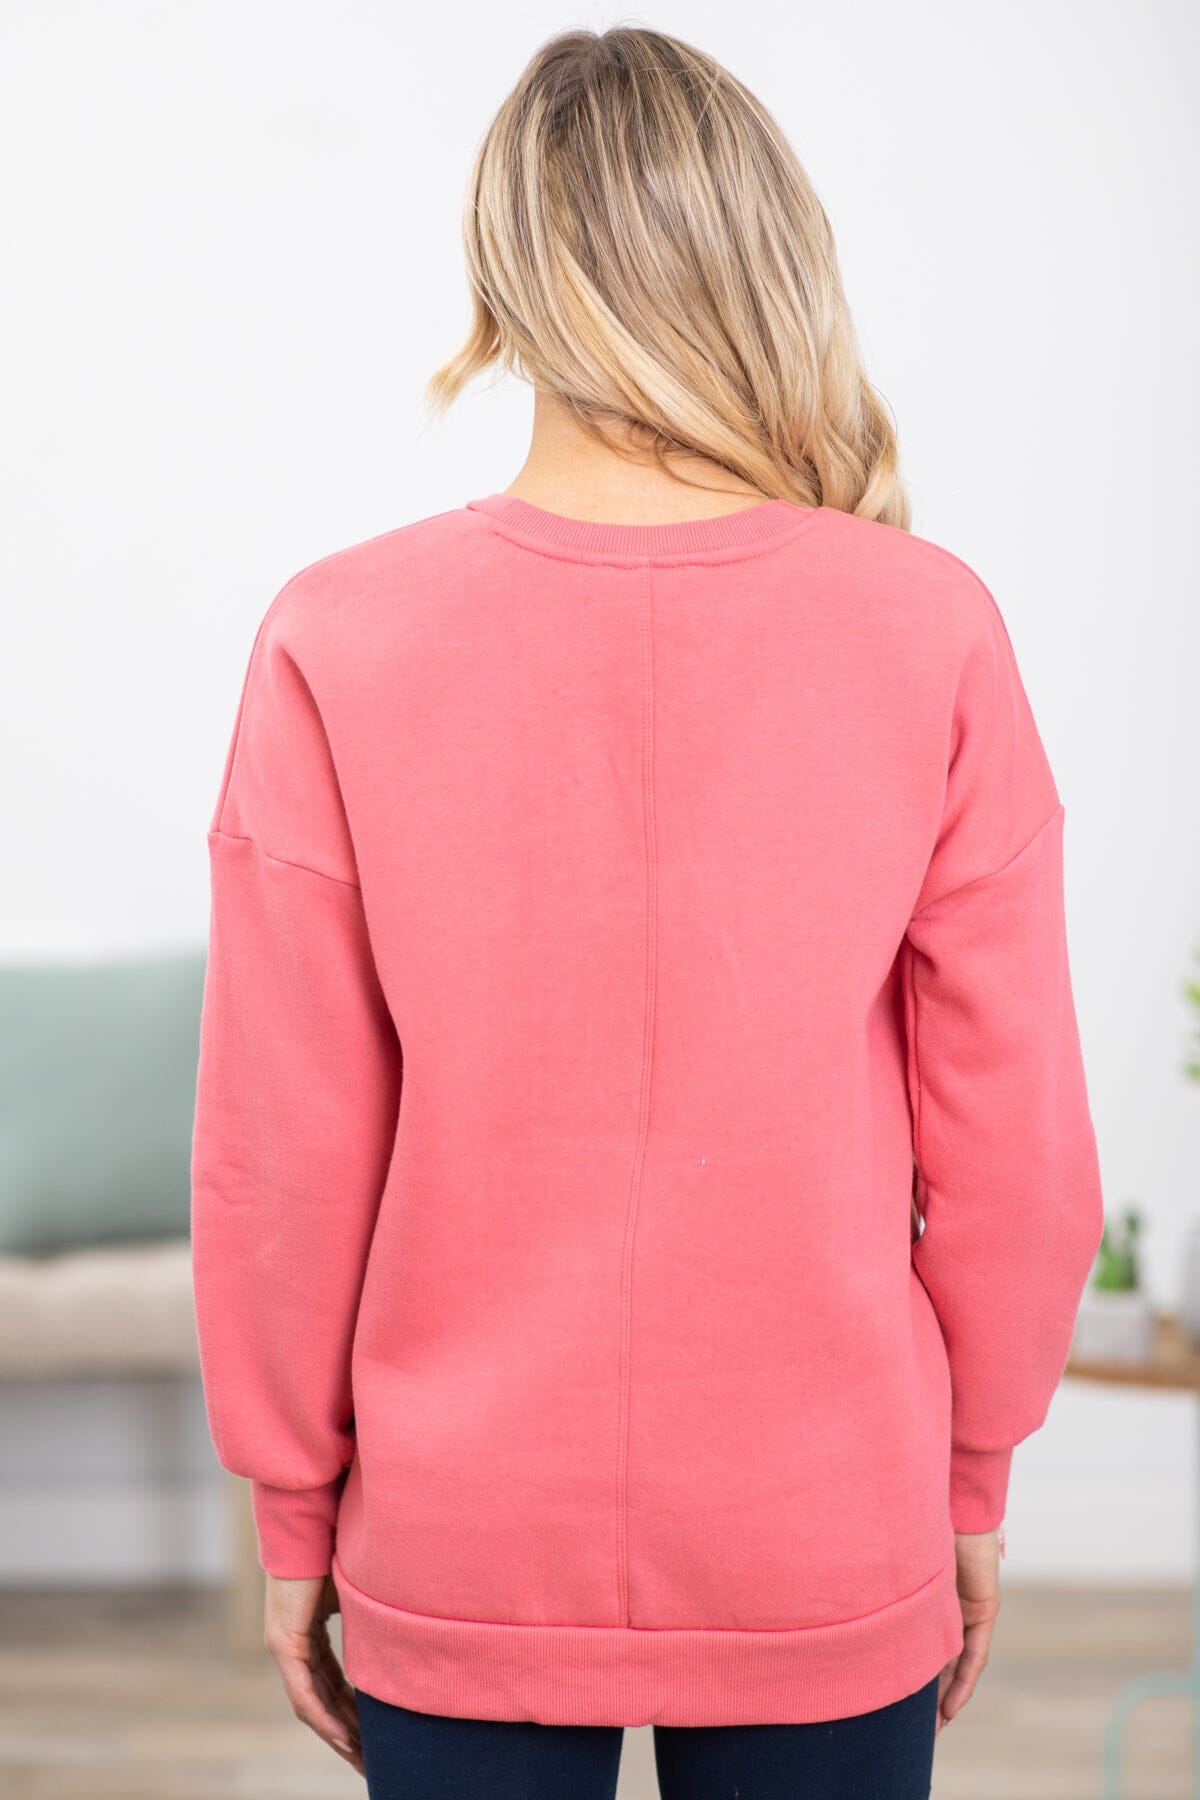 Pink Crew Neck Sweatshirt With Pockets - Filly Flair